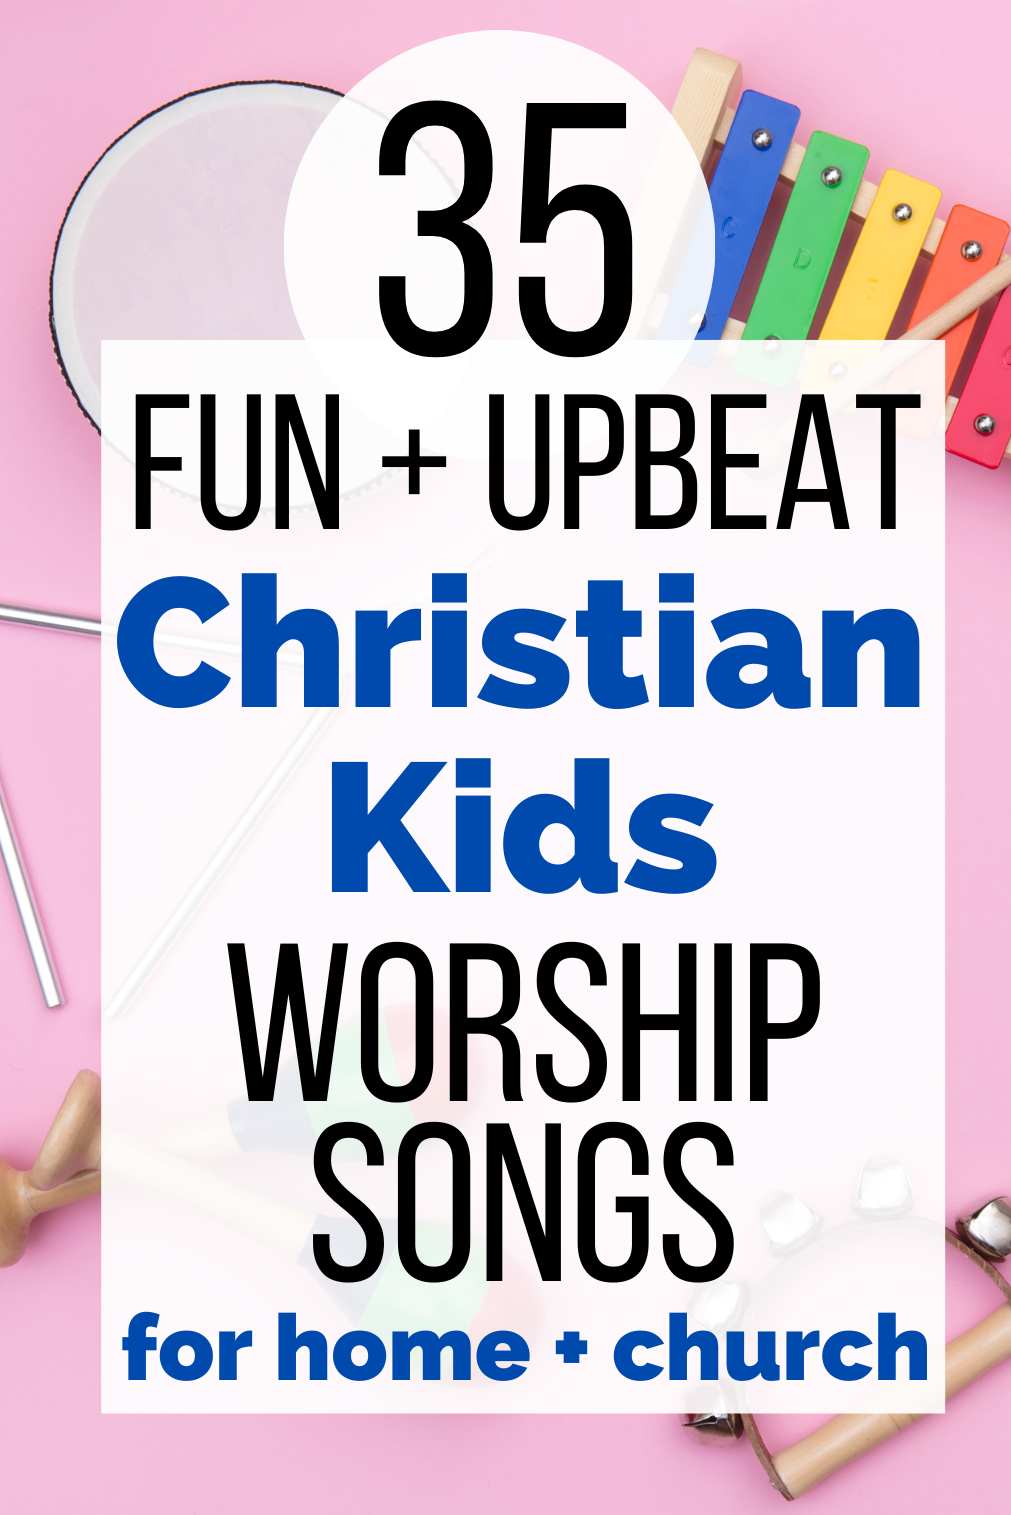 children's music class instruments (shakers, xylophone, triangle tamborine) lay on a bubblegum pink background. Text overlay reads: 35 fun + upbeat Christian Kids Worship Songs for Home and church